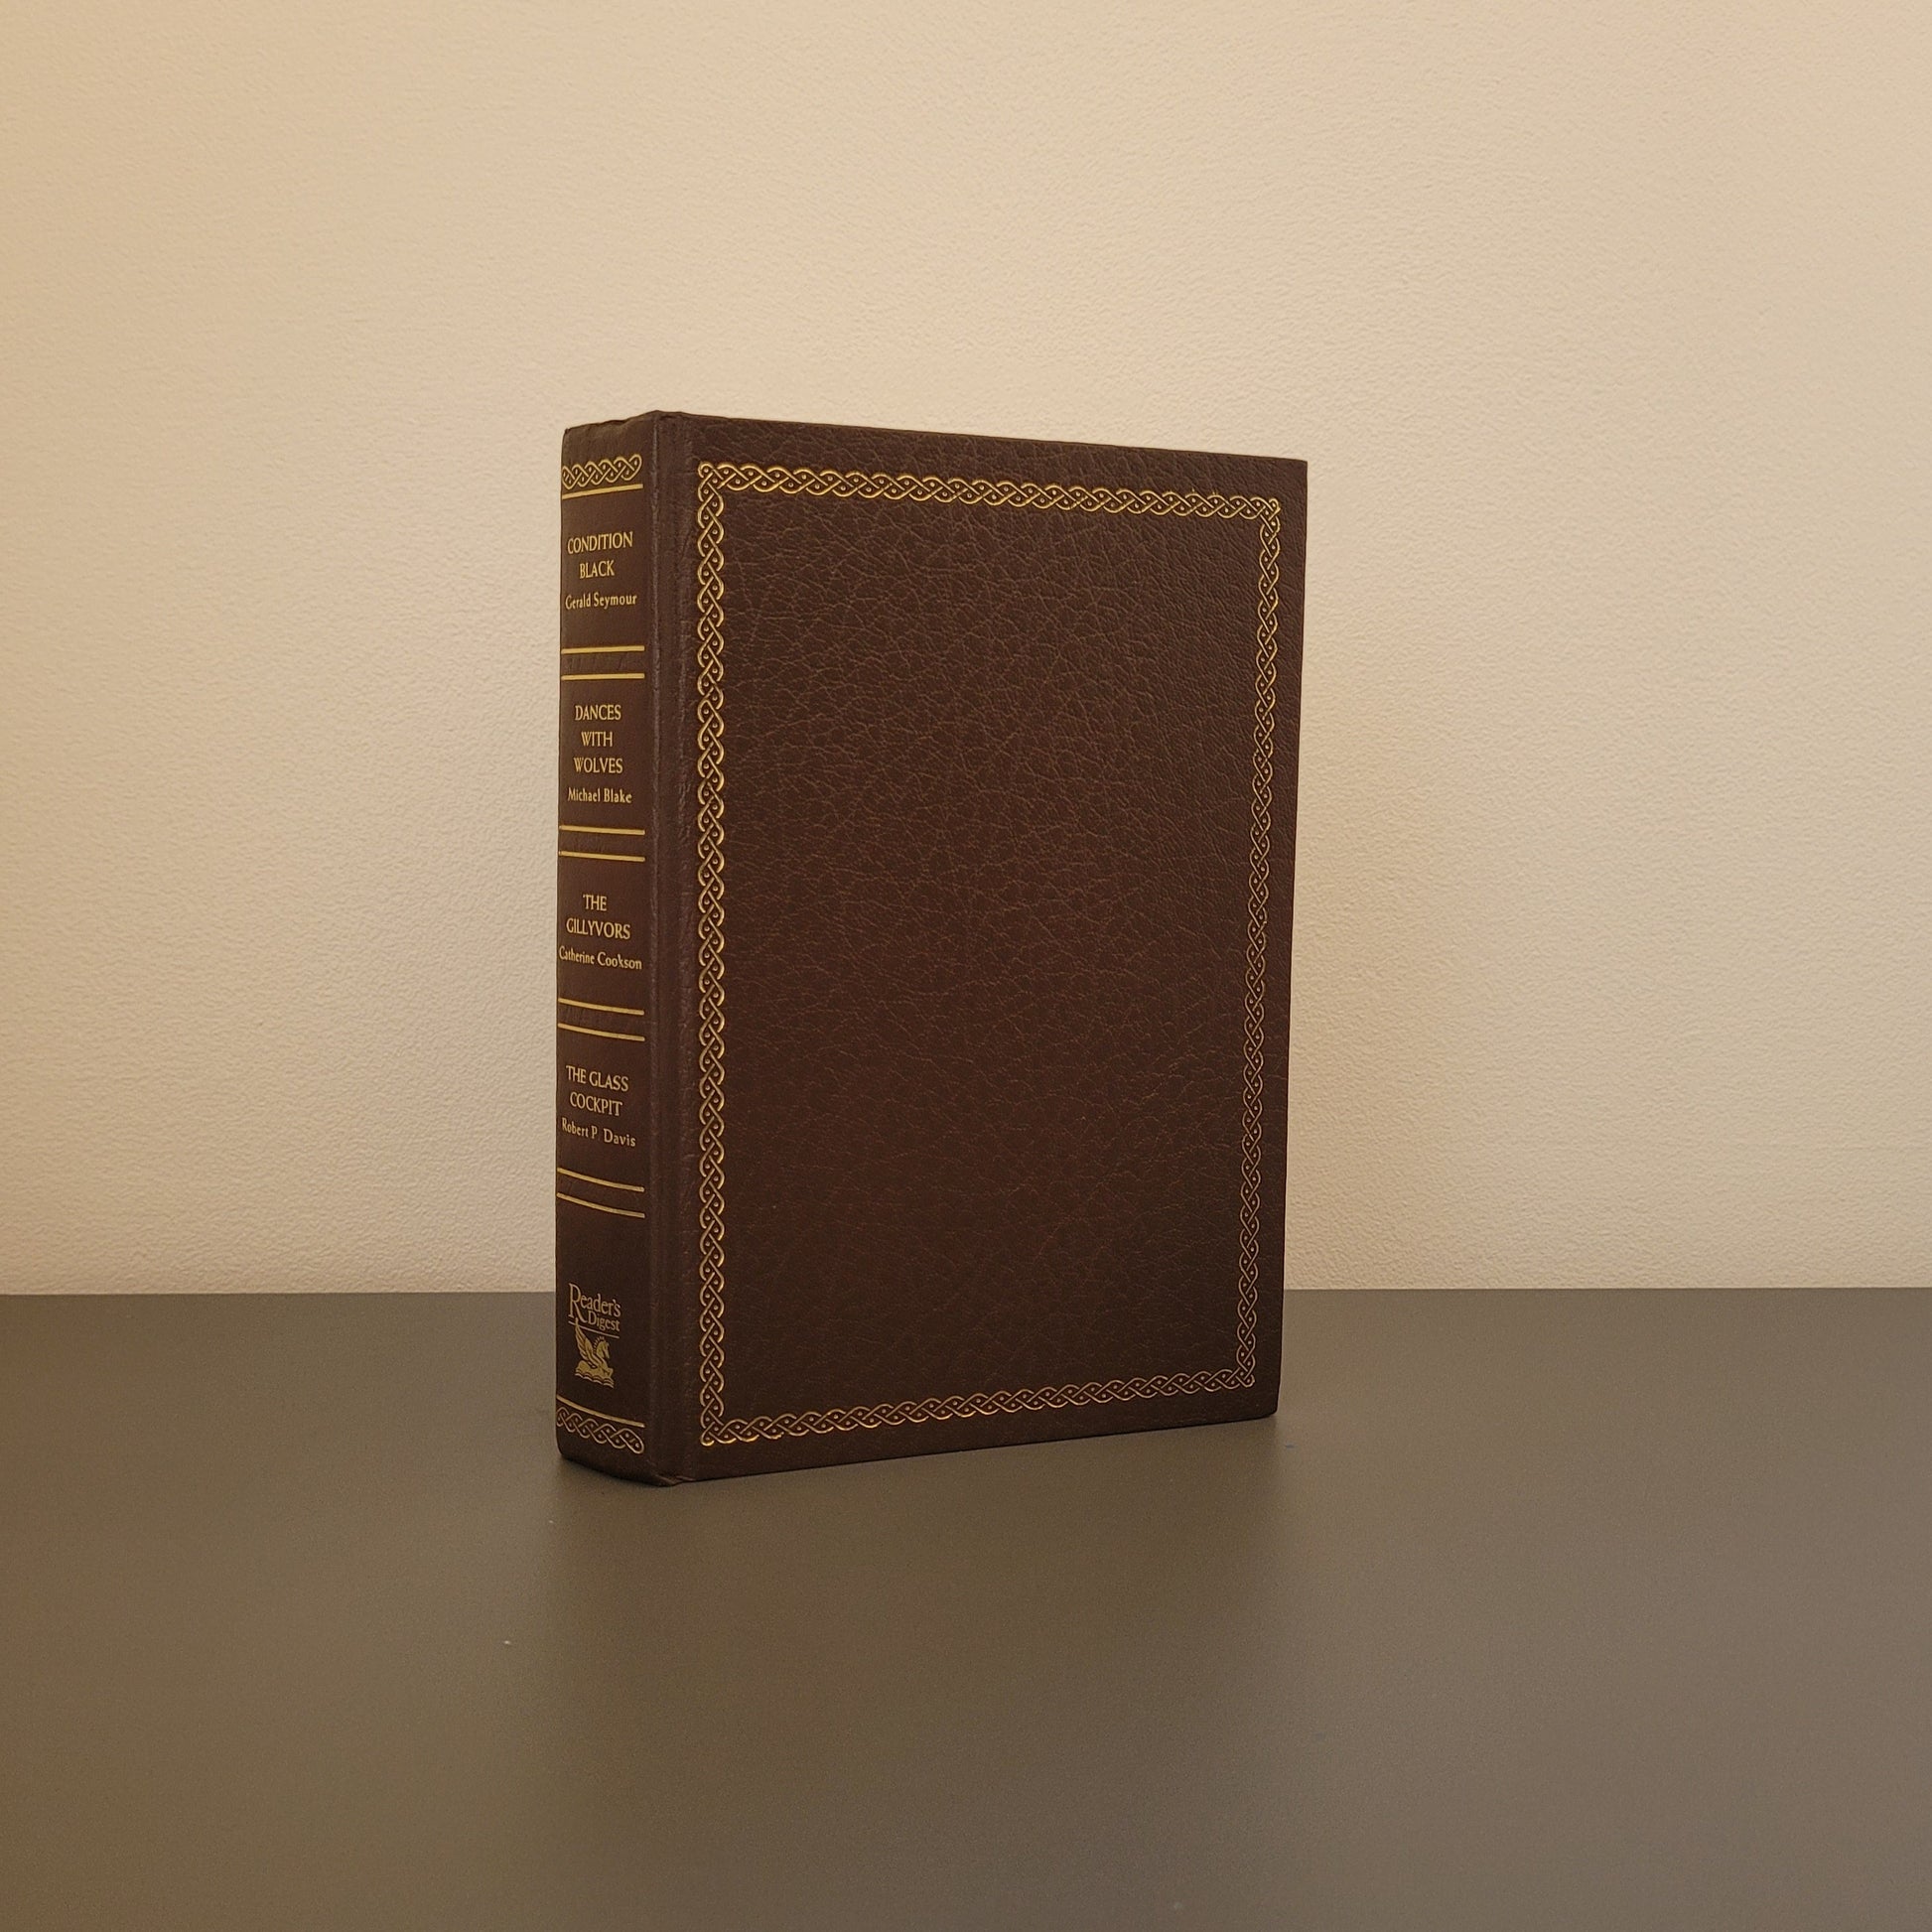 The front of the book fold - a brown hardback book with a gold border.